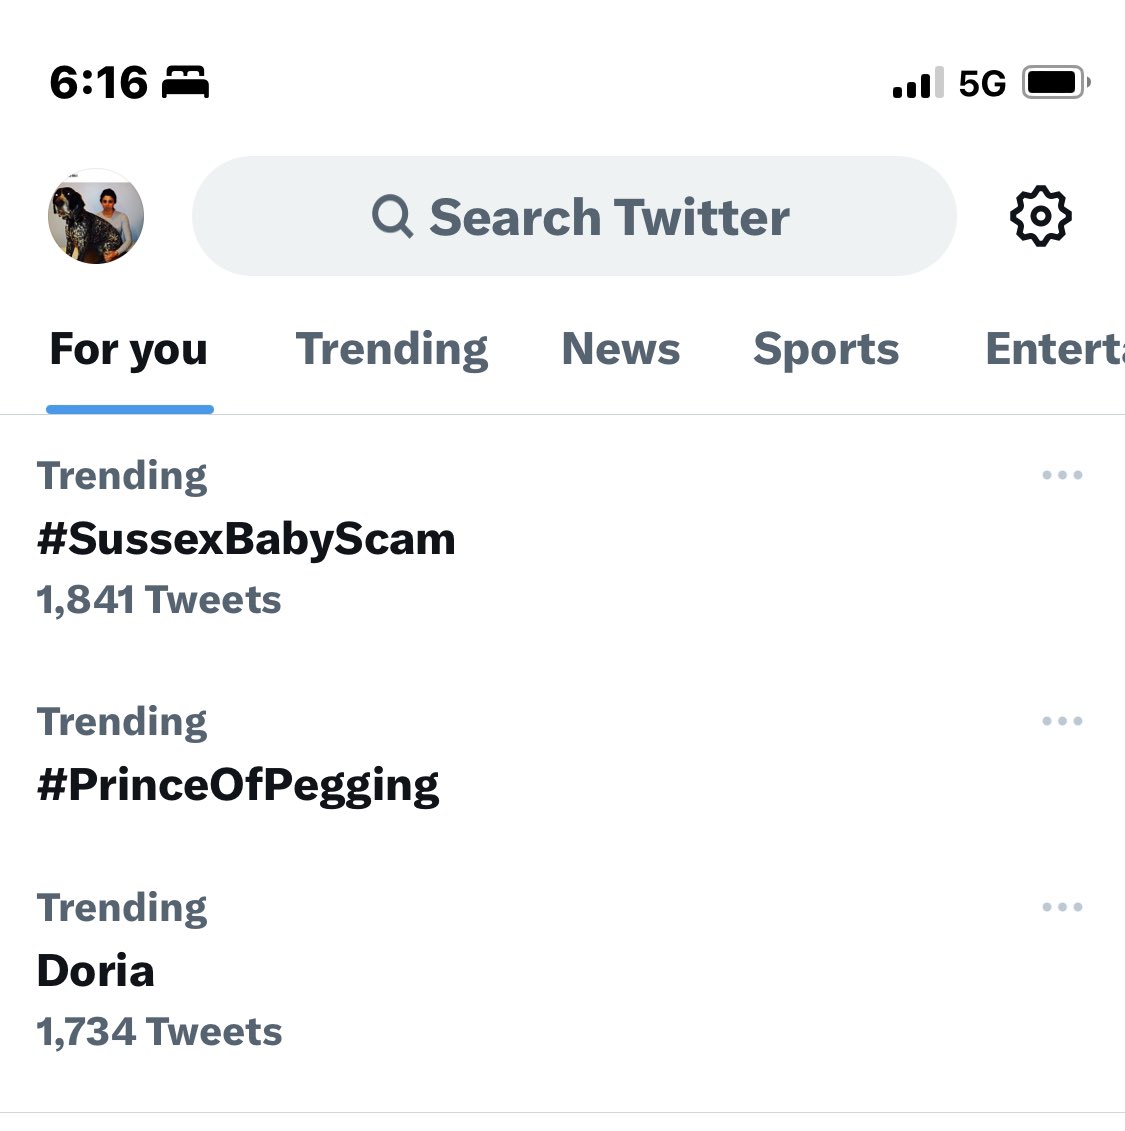 🚨🚨LET’S KEEP THE #SussexBabyScam MOMENTUM GOING! 

1 STEP CLOSER TO ANSWERS

#HarryandMeghanAreAJoke #HarryAndMeghanAreFinished #HarryandMeghanAreGrifters #HarryandMeghanSmollett